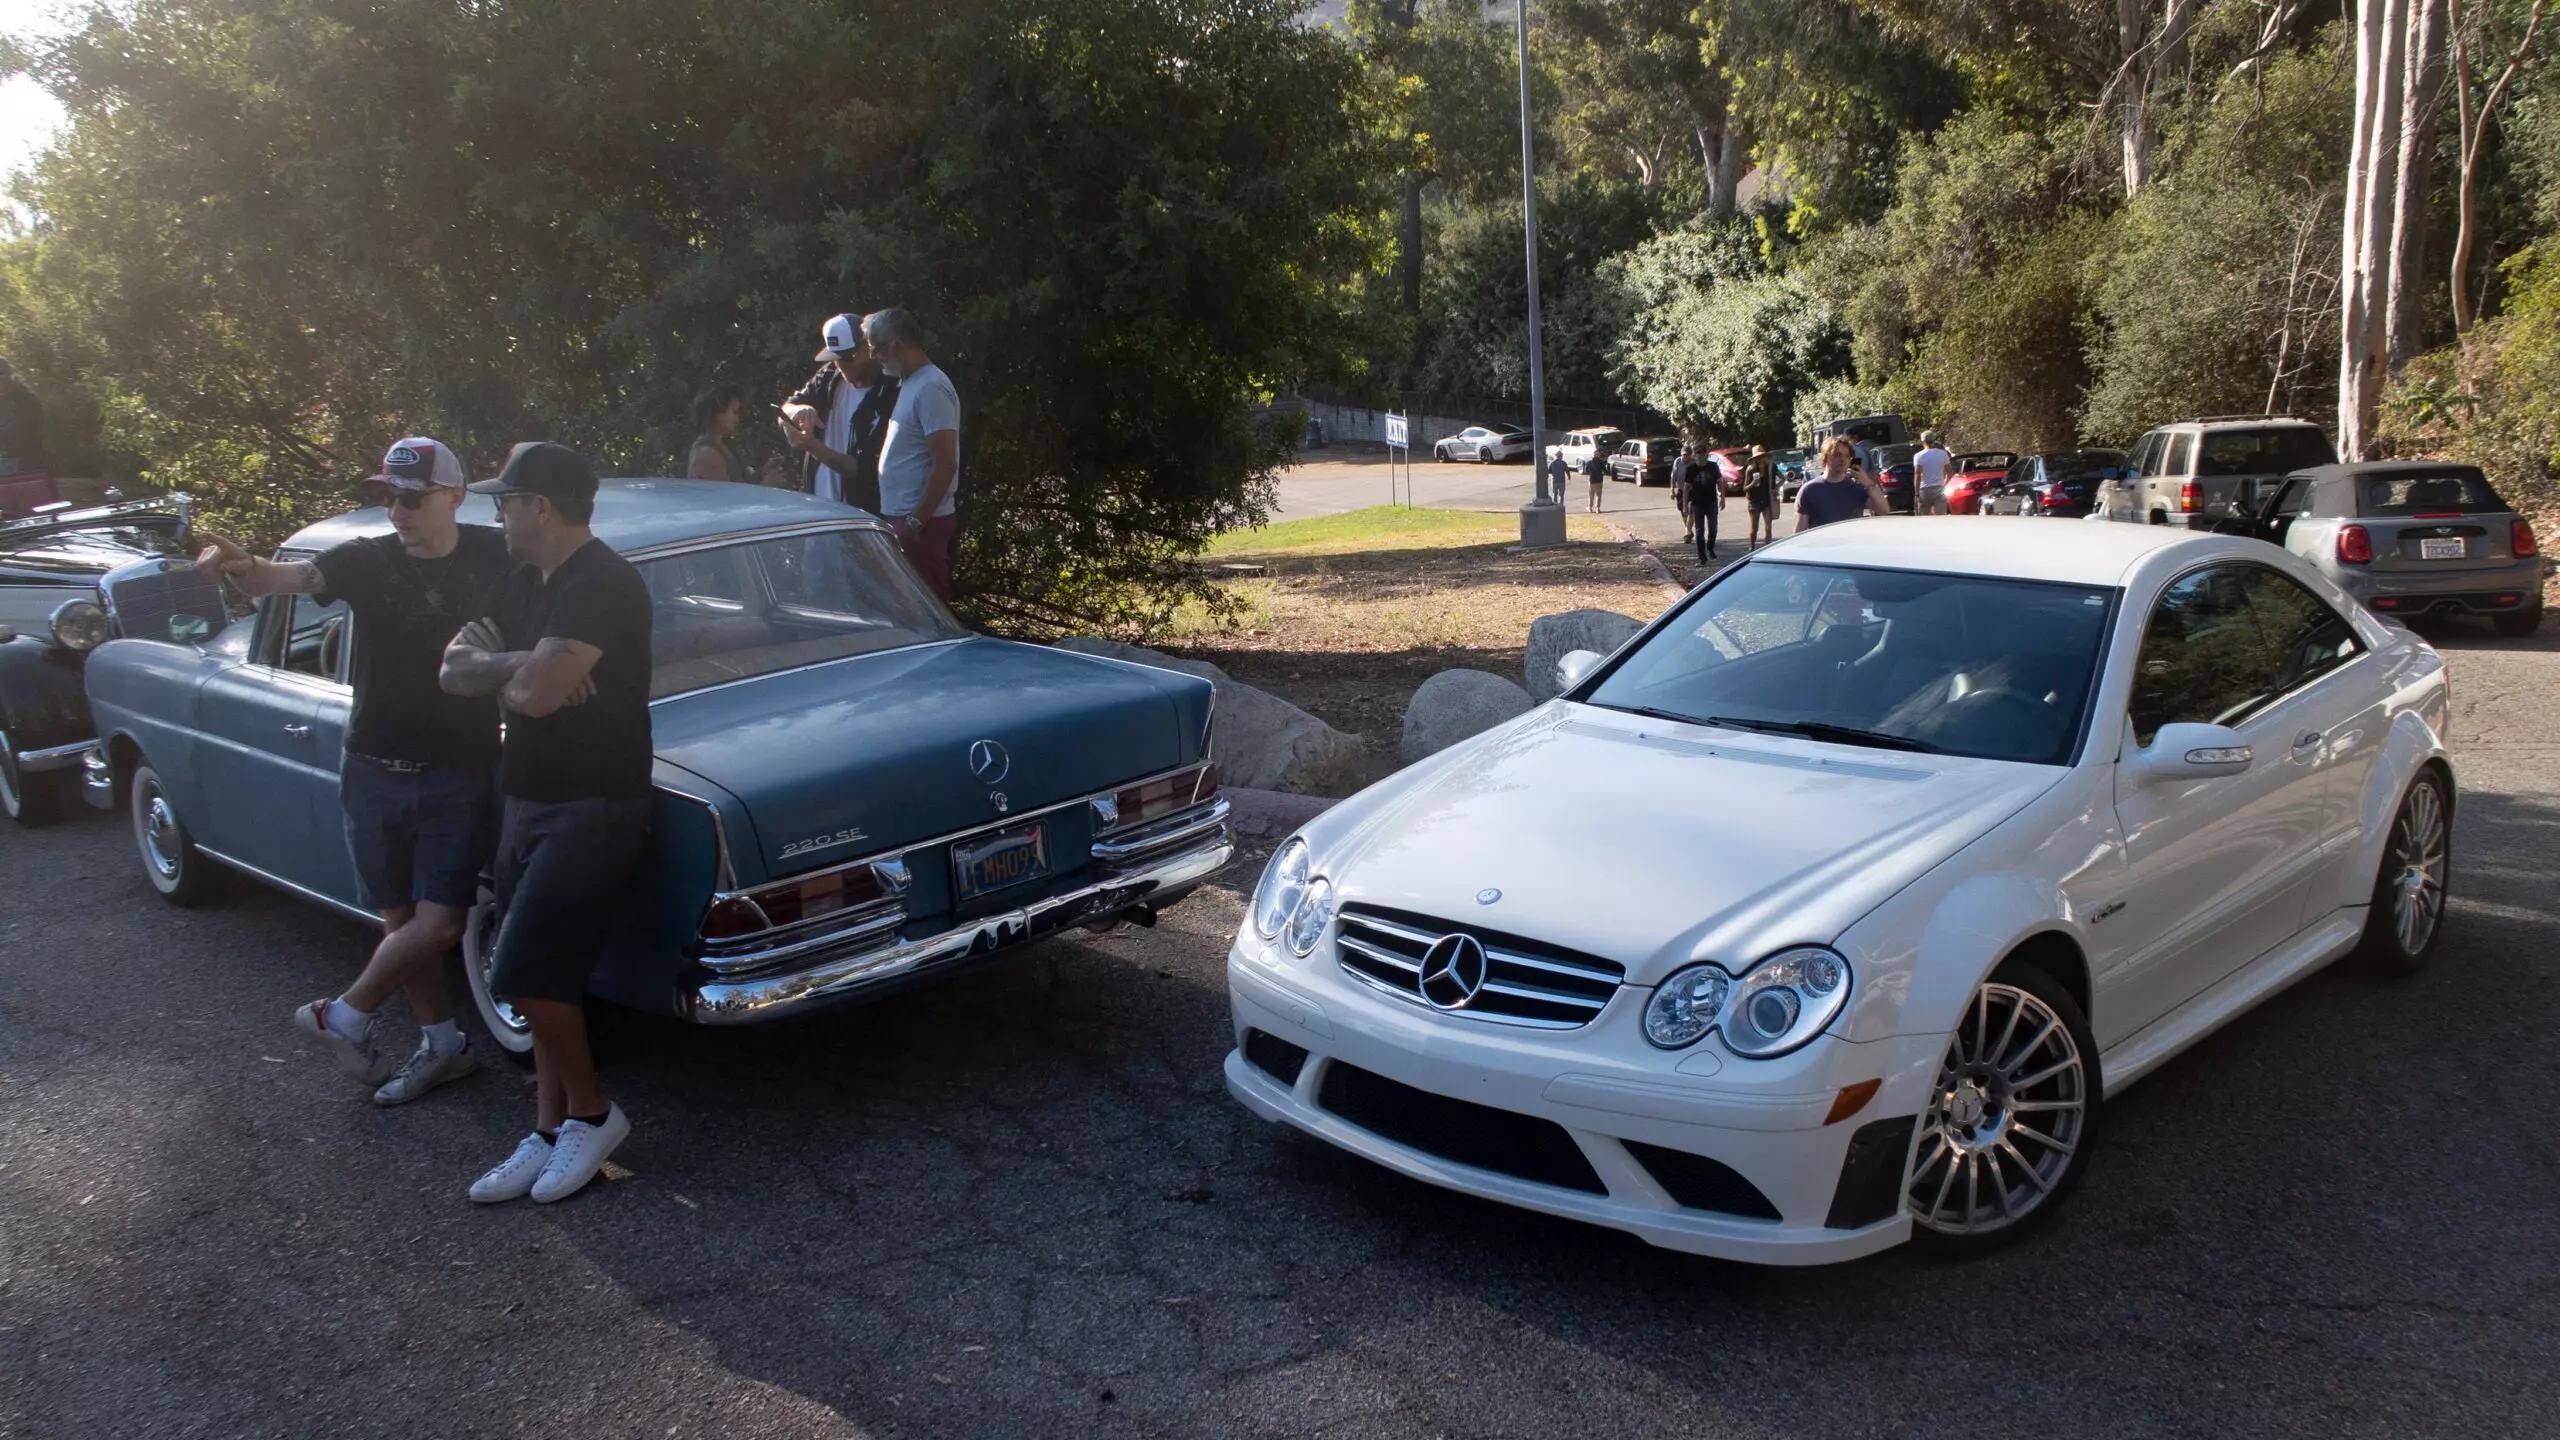 It’s Amazing How Well the Mercedes CLK Black Series Still Stands Out After 14 Years | Autance